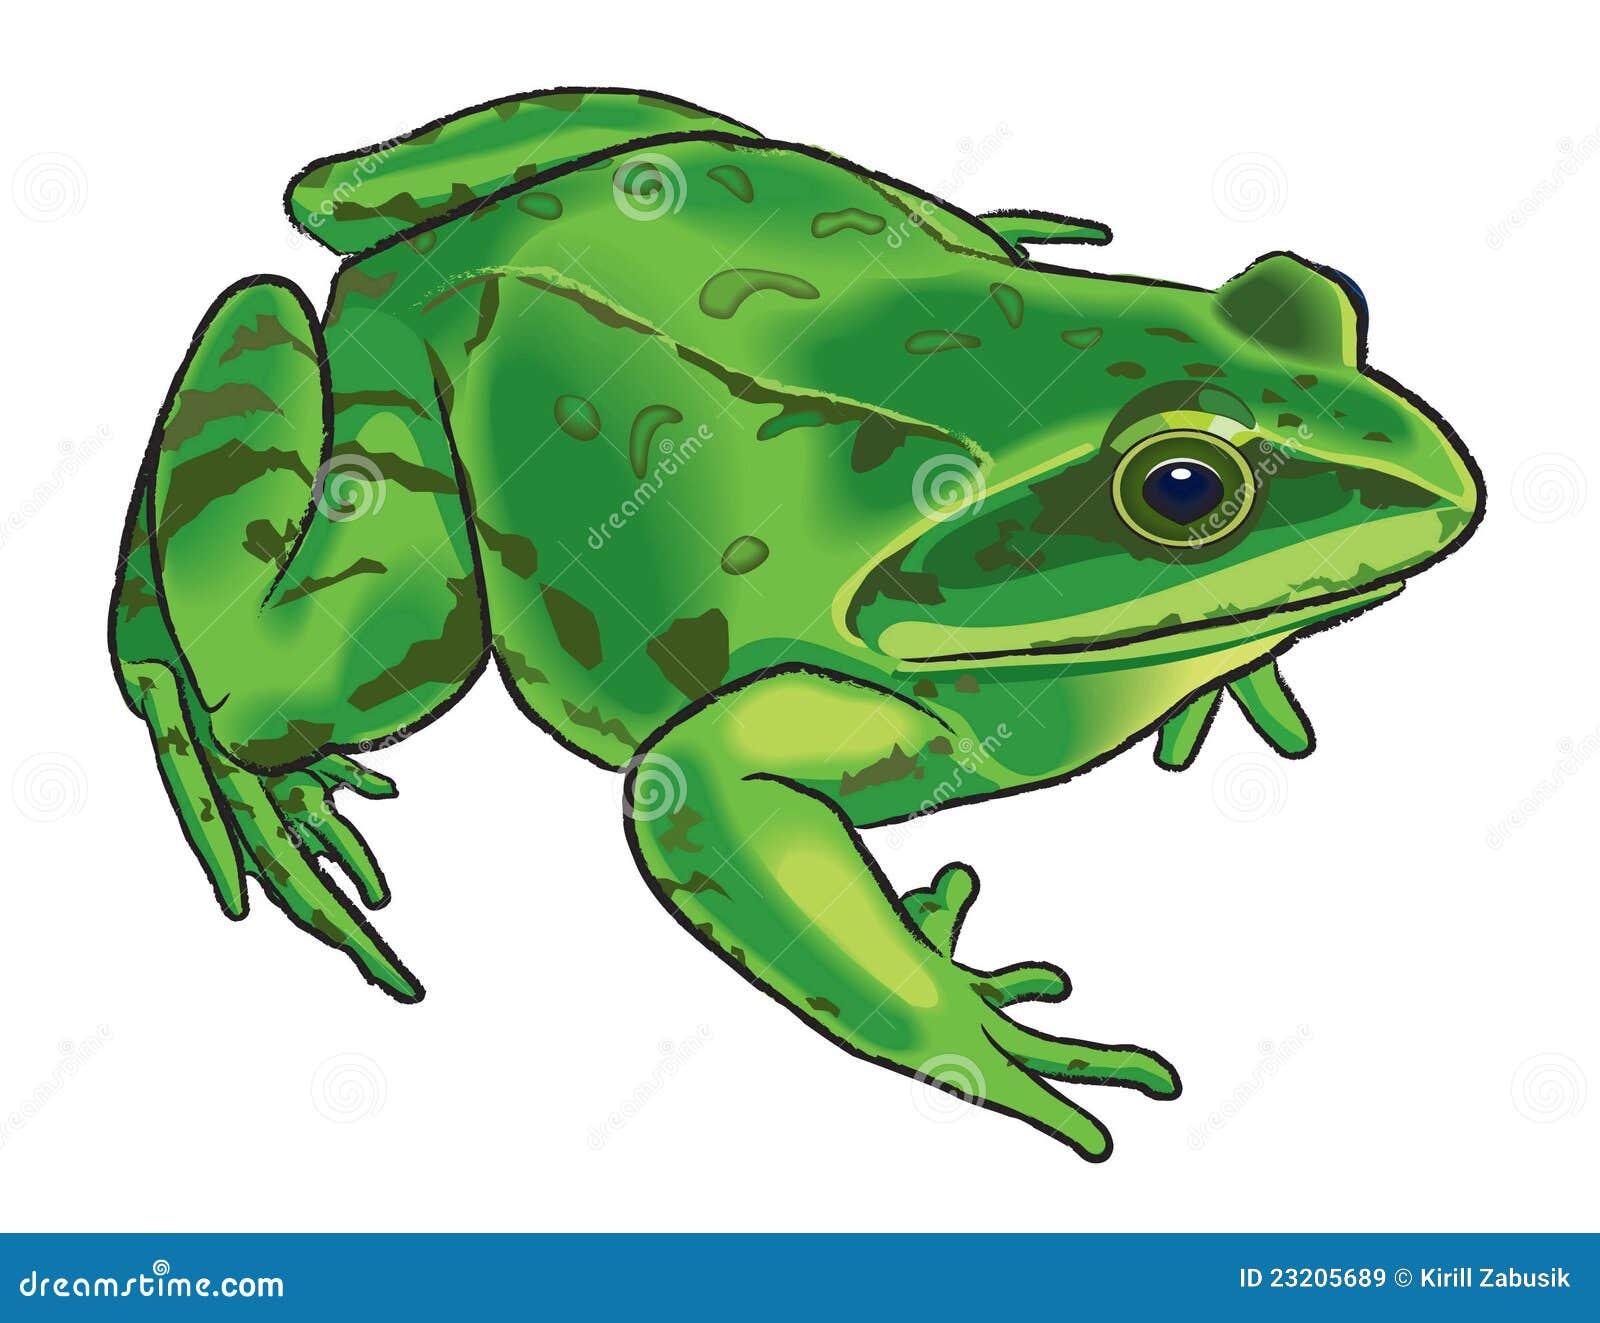 How to Draw a Cartoon Frog 10 Steps with Pictures  wikiHow Fun